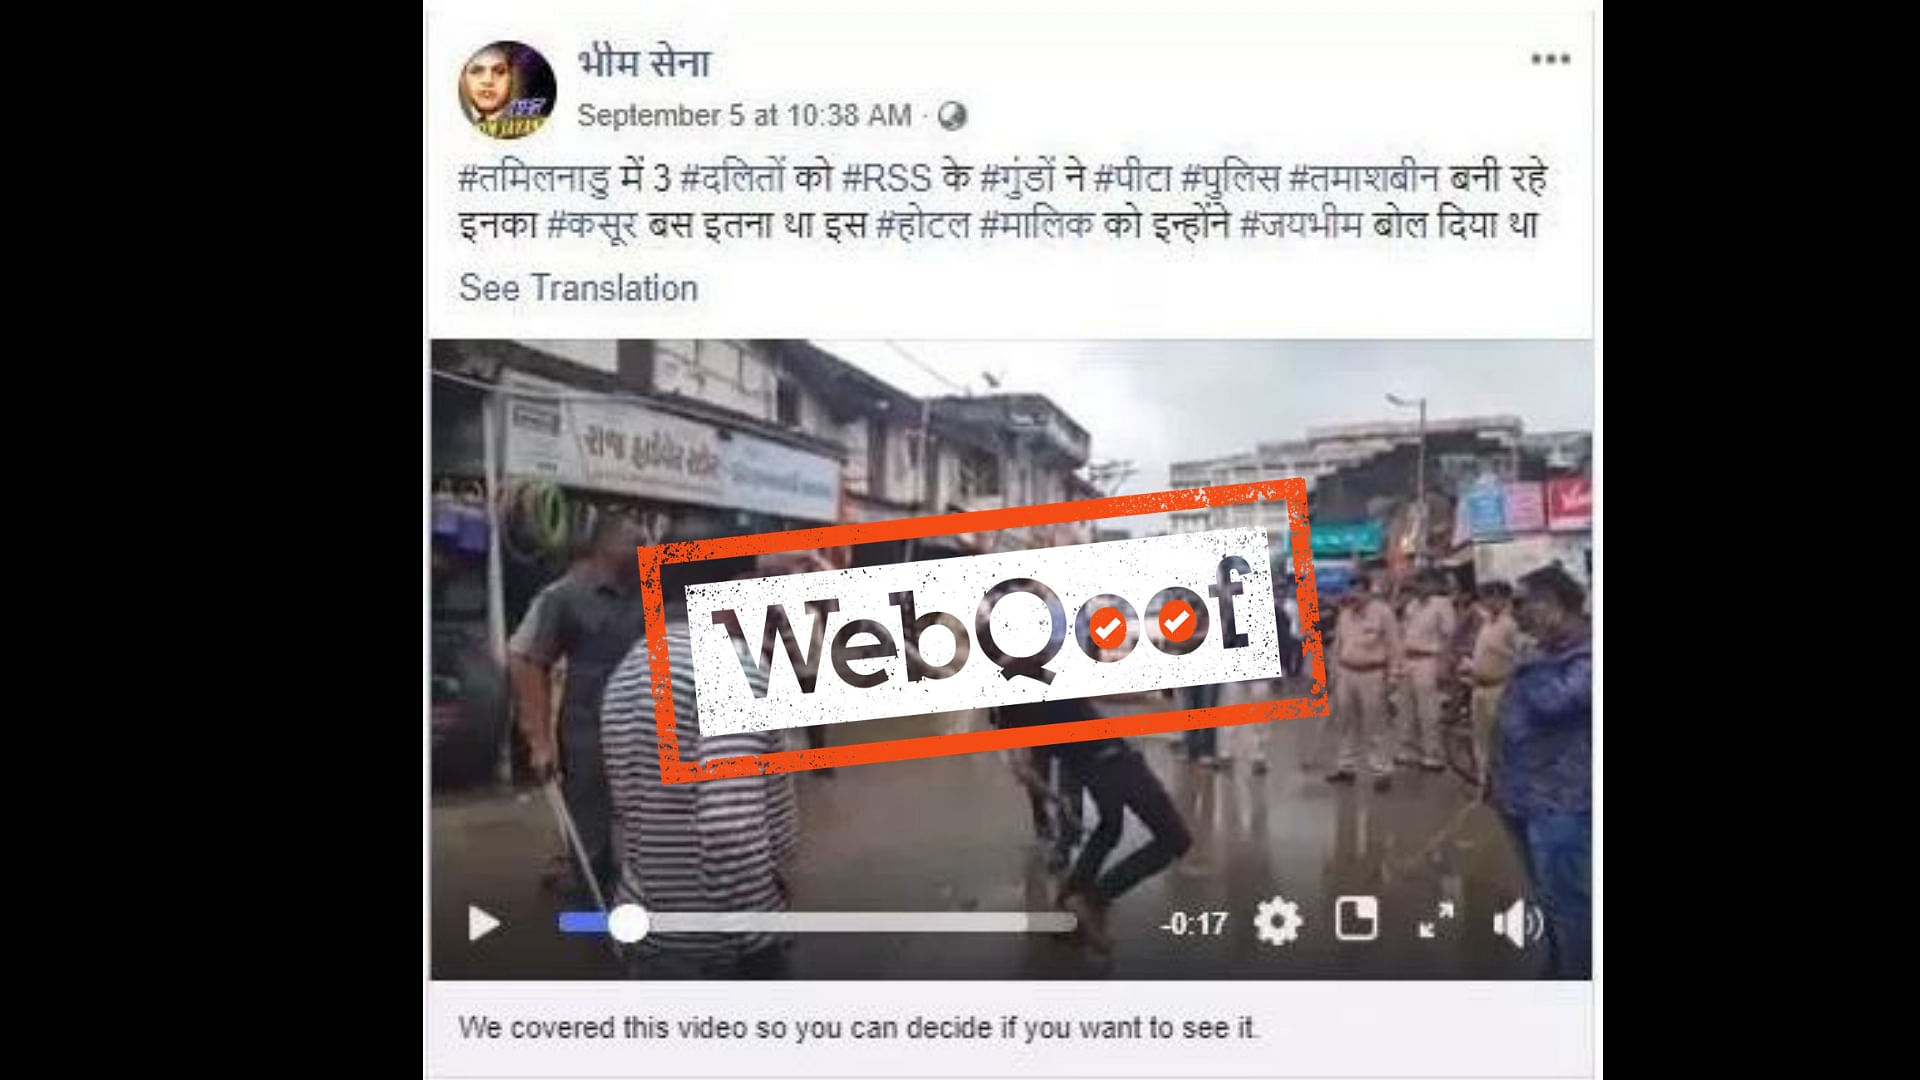 The same video is being shared on Facebook with the same false narrative but from Gujarat.